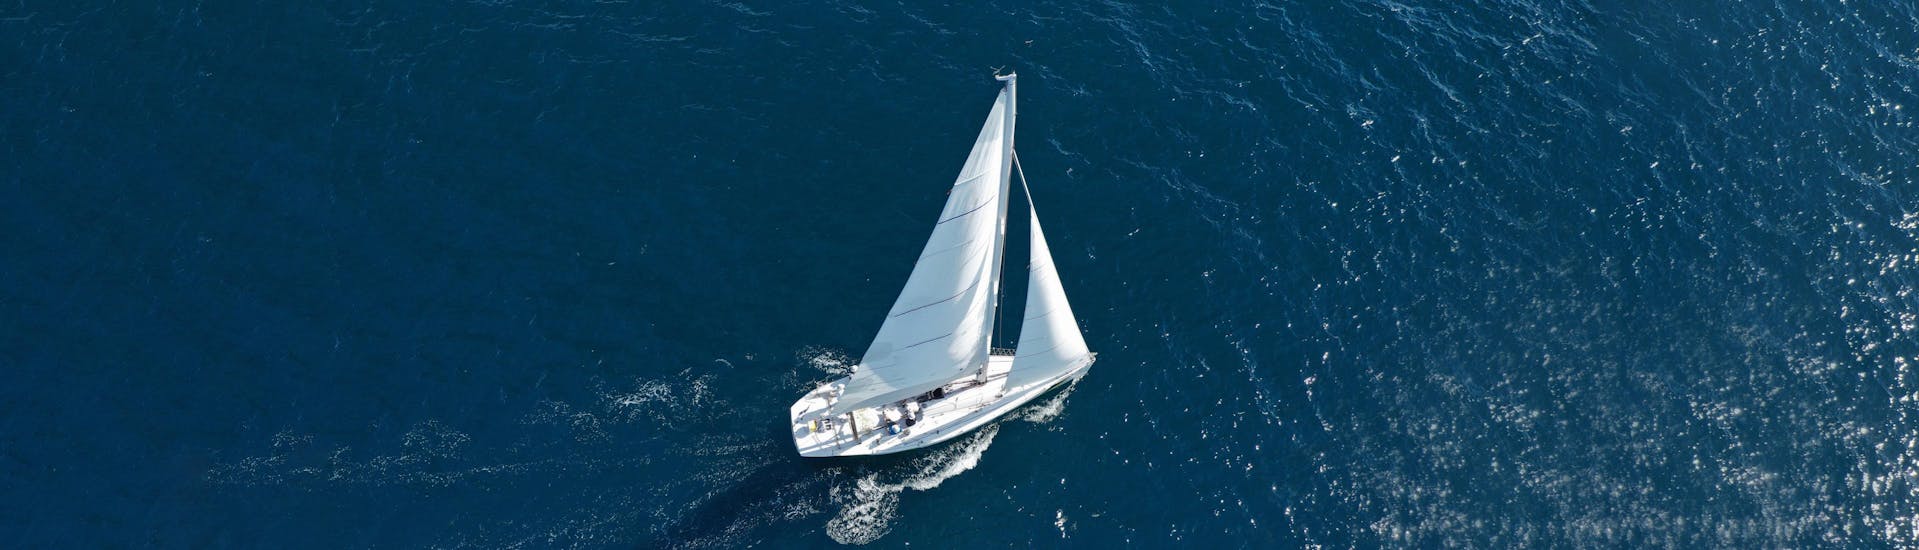 Enjoy a sailing tour and let the wind take you to unique locations